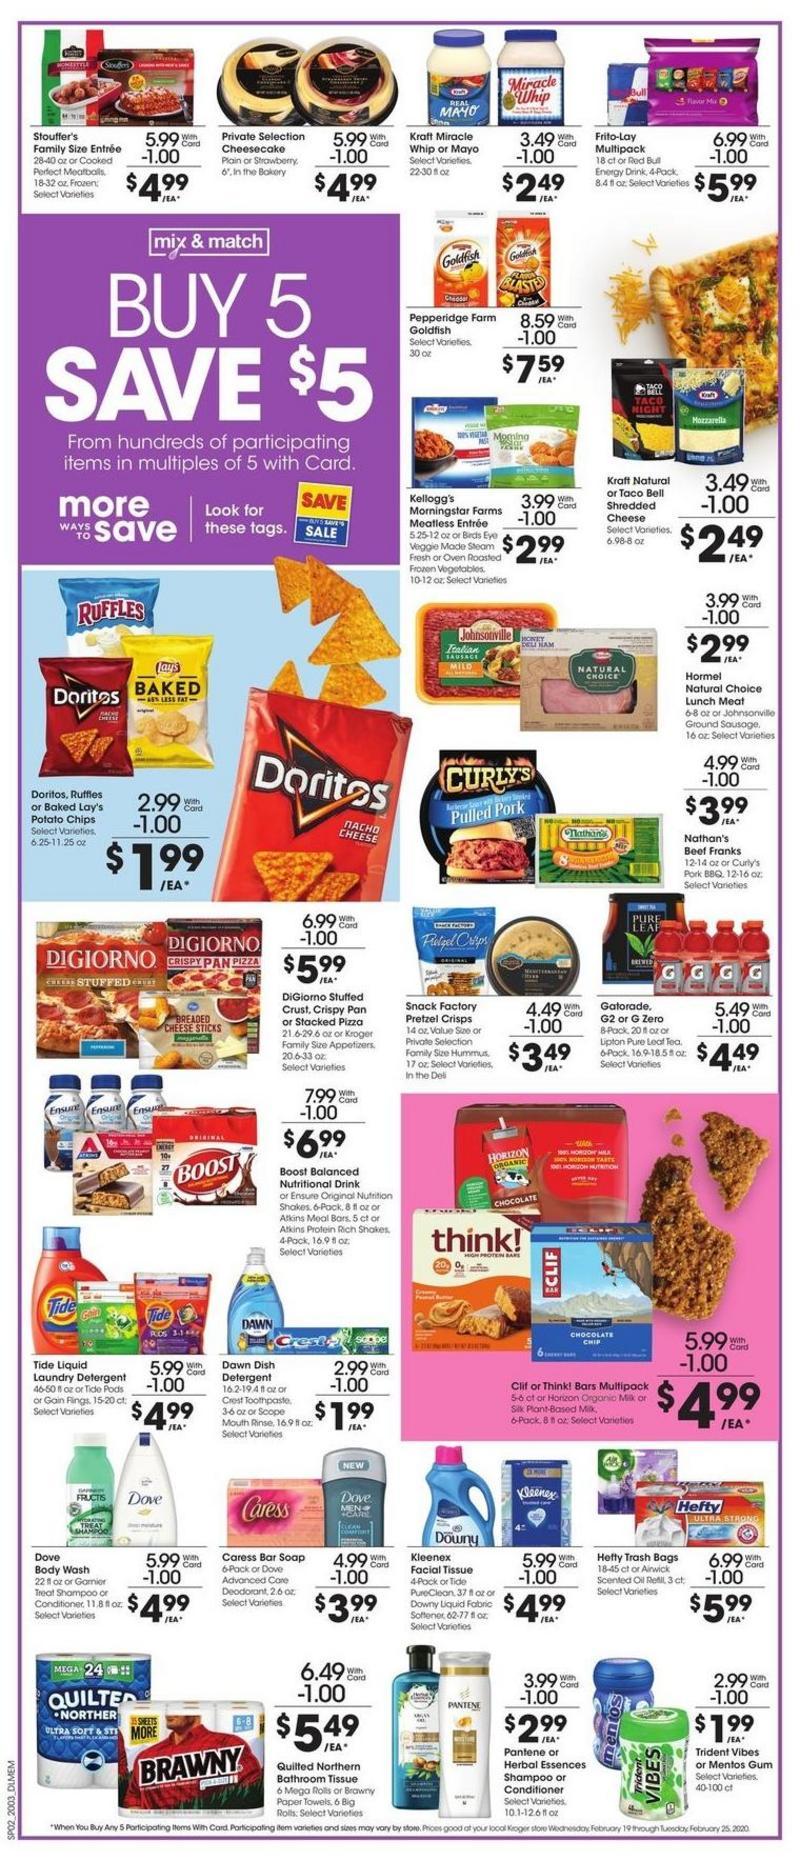 Kroger Weekly Ad from February 19